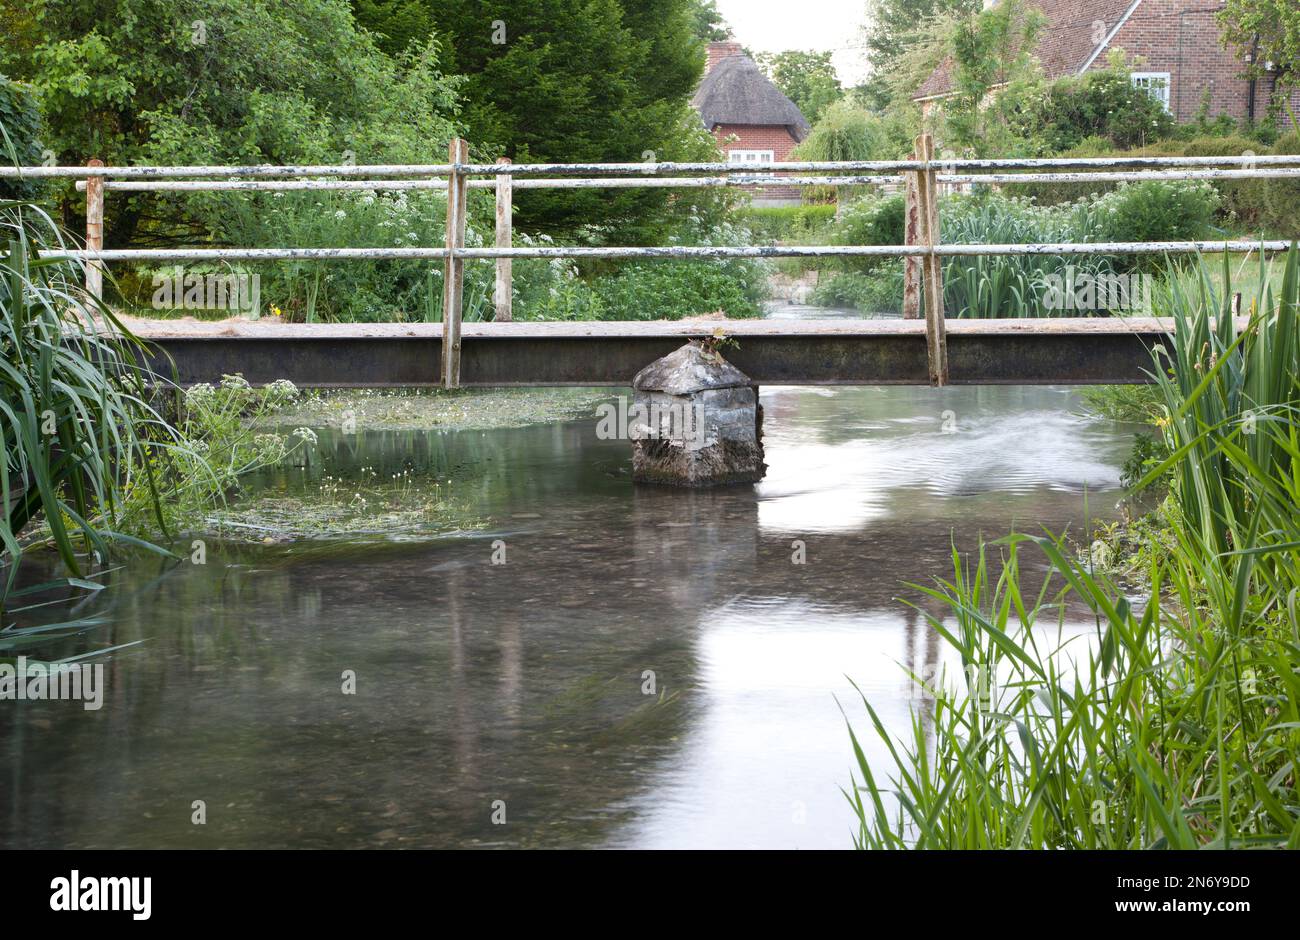 A footbridge on the River Ebble in the village of Stratford Tony, near Salisbury in Wiltshire. Stock Photo